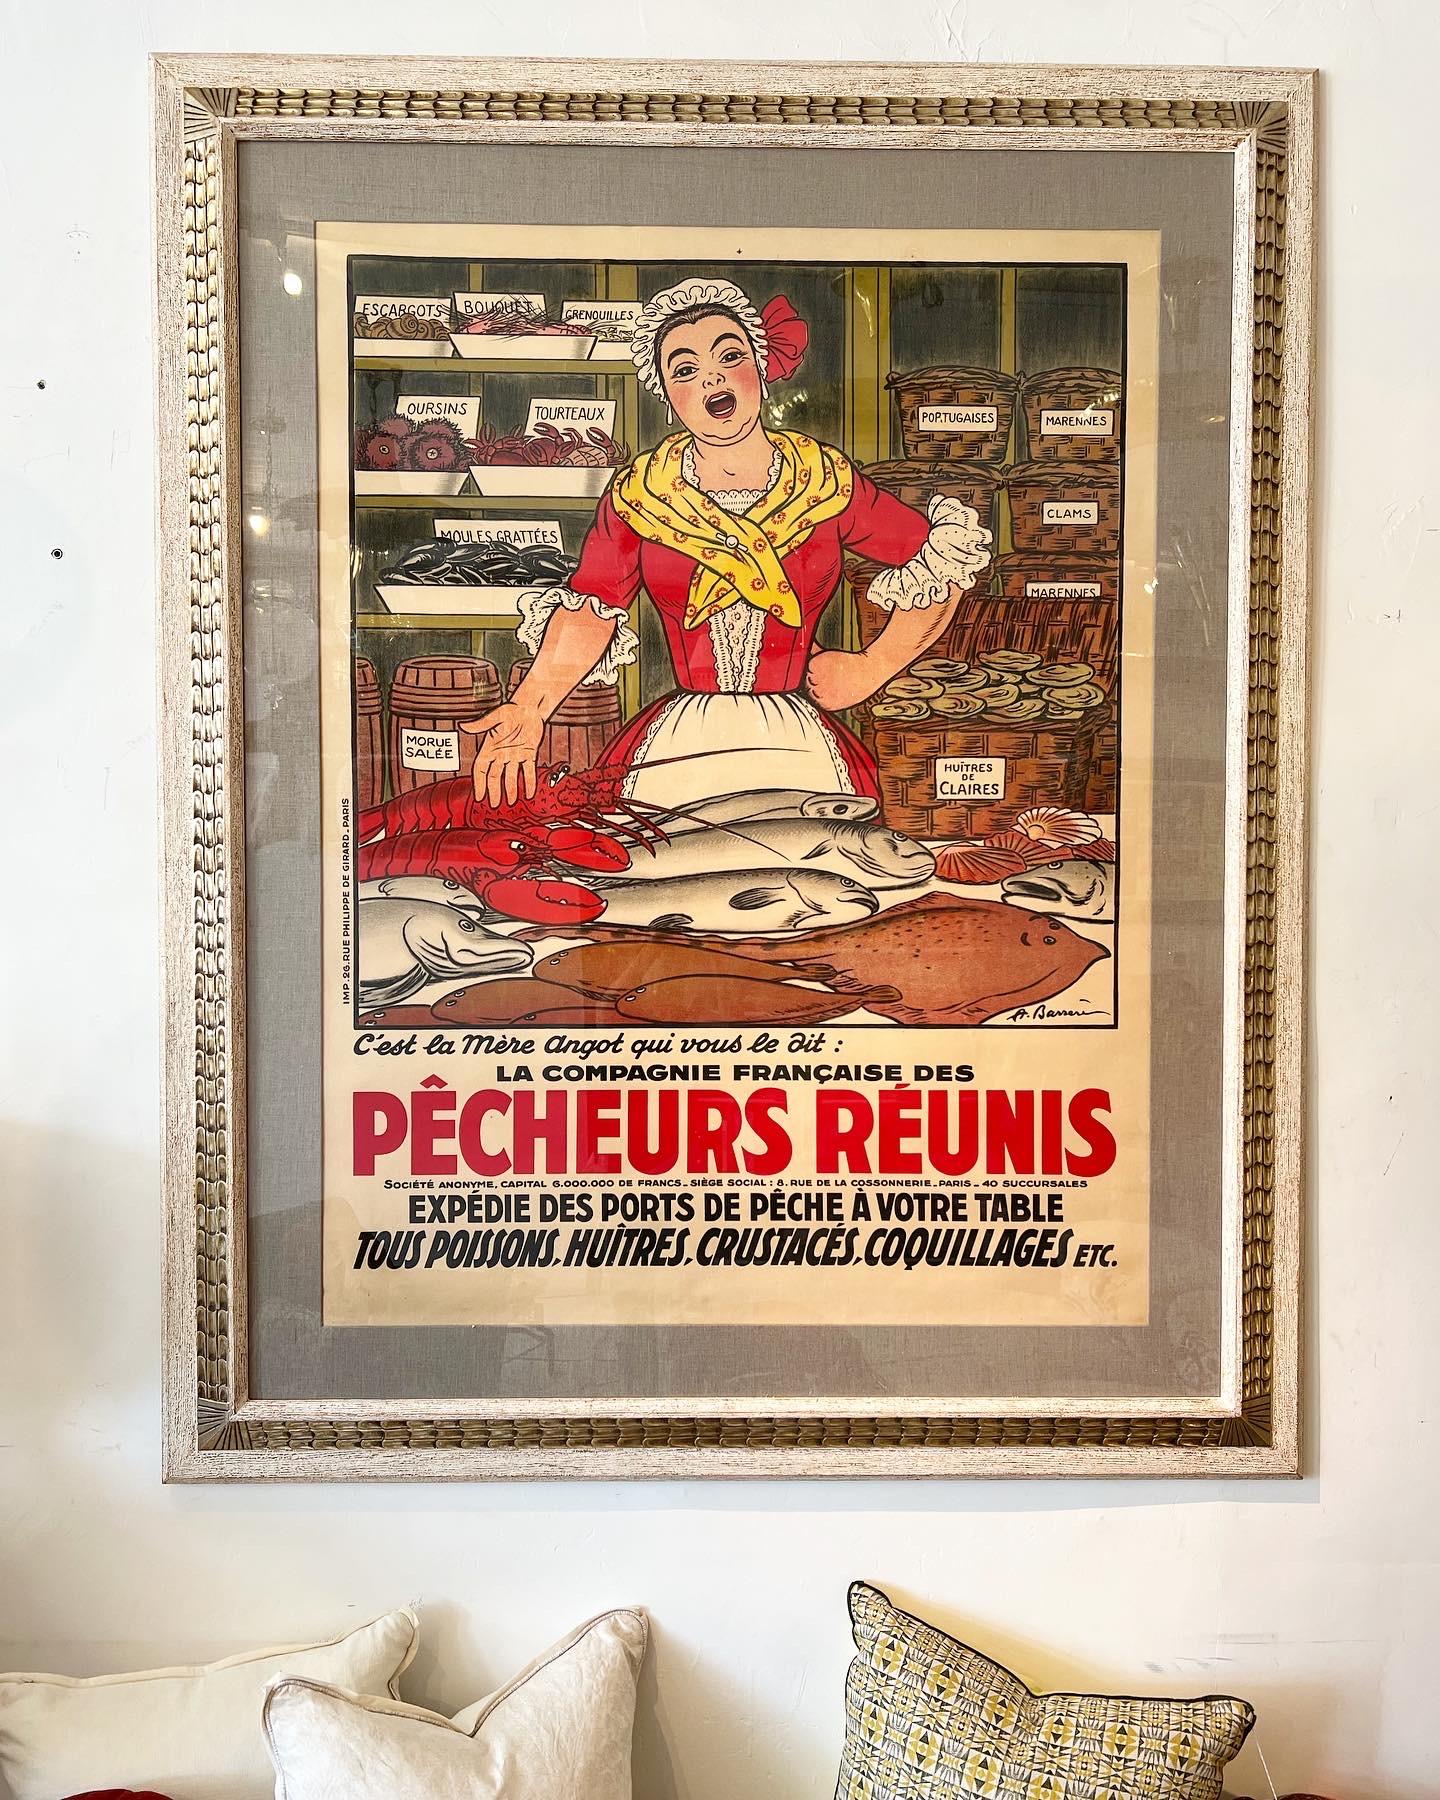 Dimensions with frame: 62? x 76?
Artist: Adrien Barrere
Medium: Original Stone Lithograph Vintage Poster

c. 1910

“Mother Angot gives you word that the United Fishermen can get the catch from the port right to your table, including all fish,